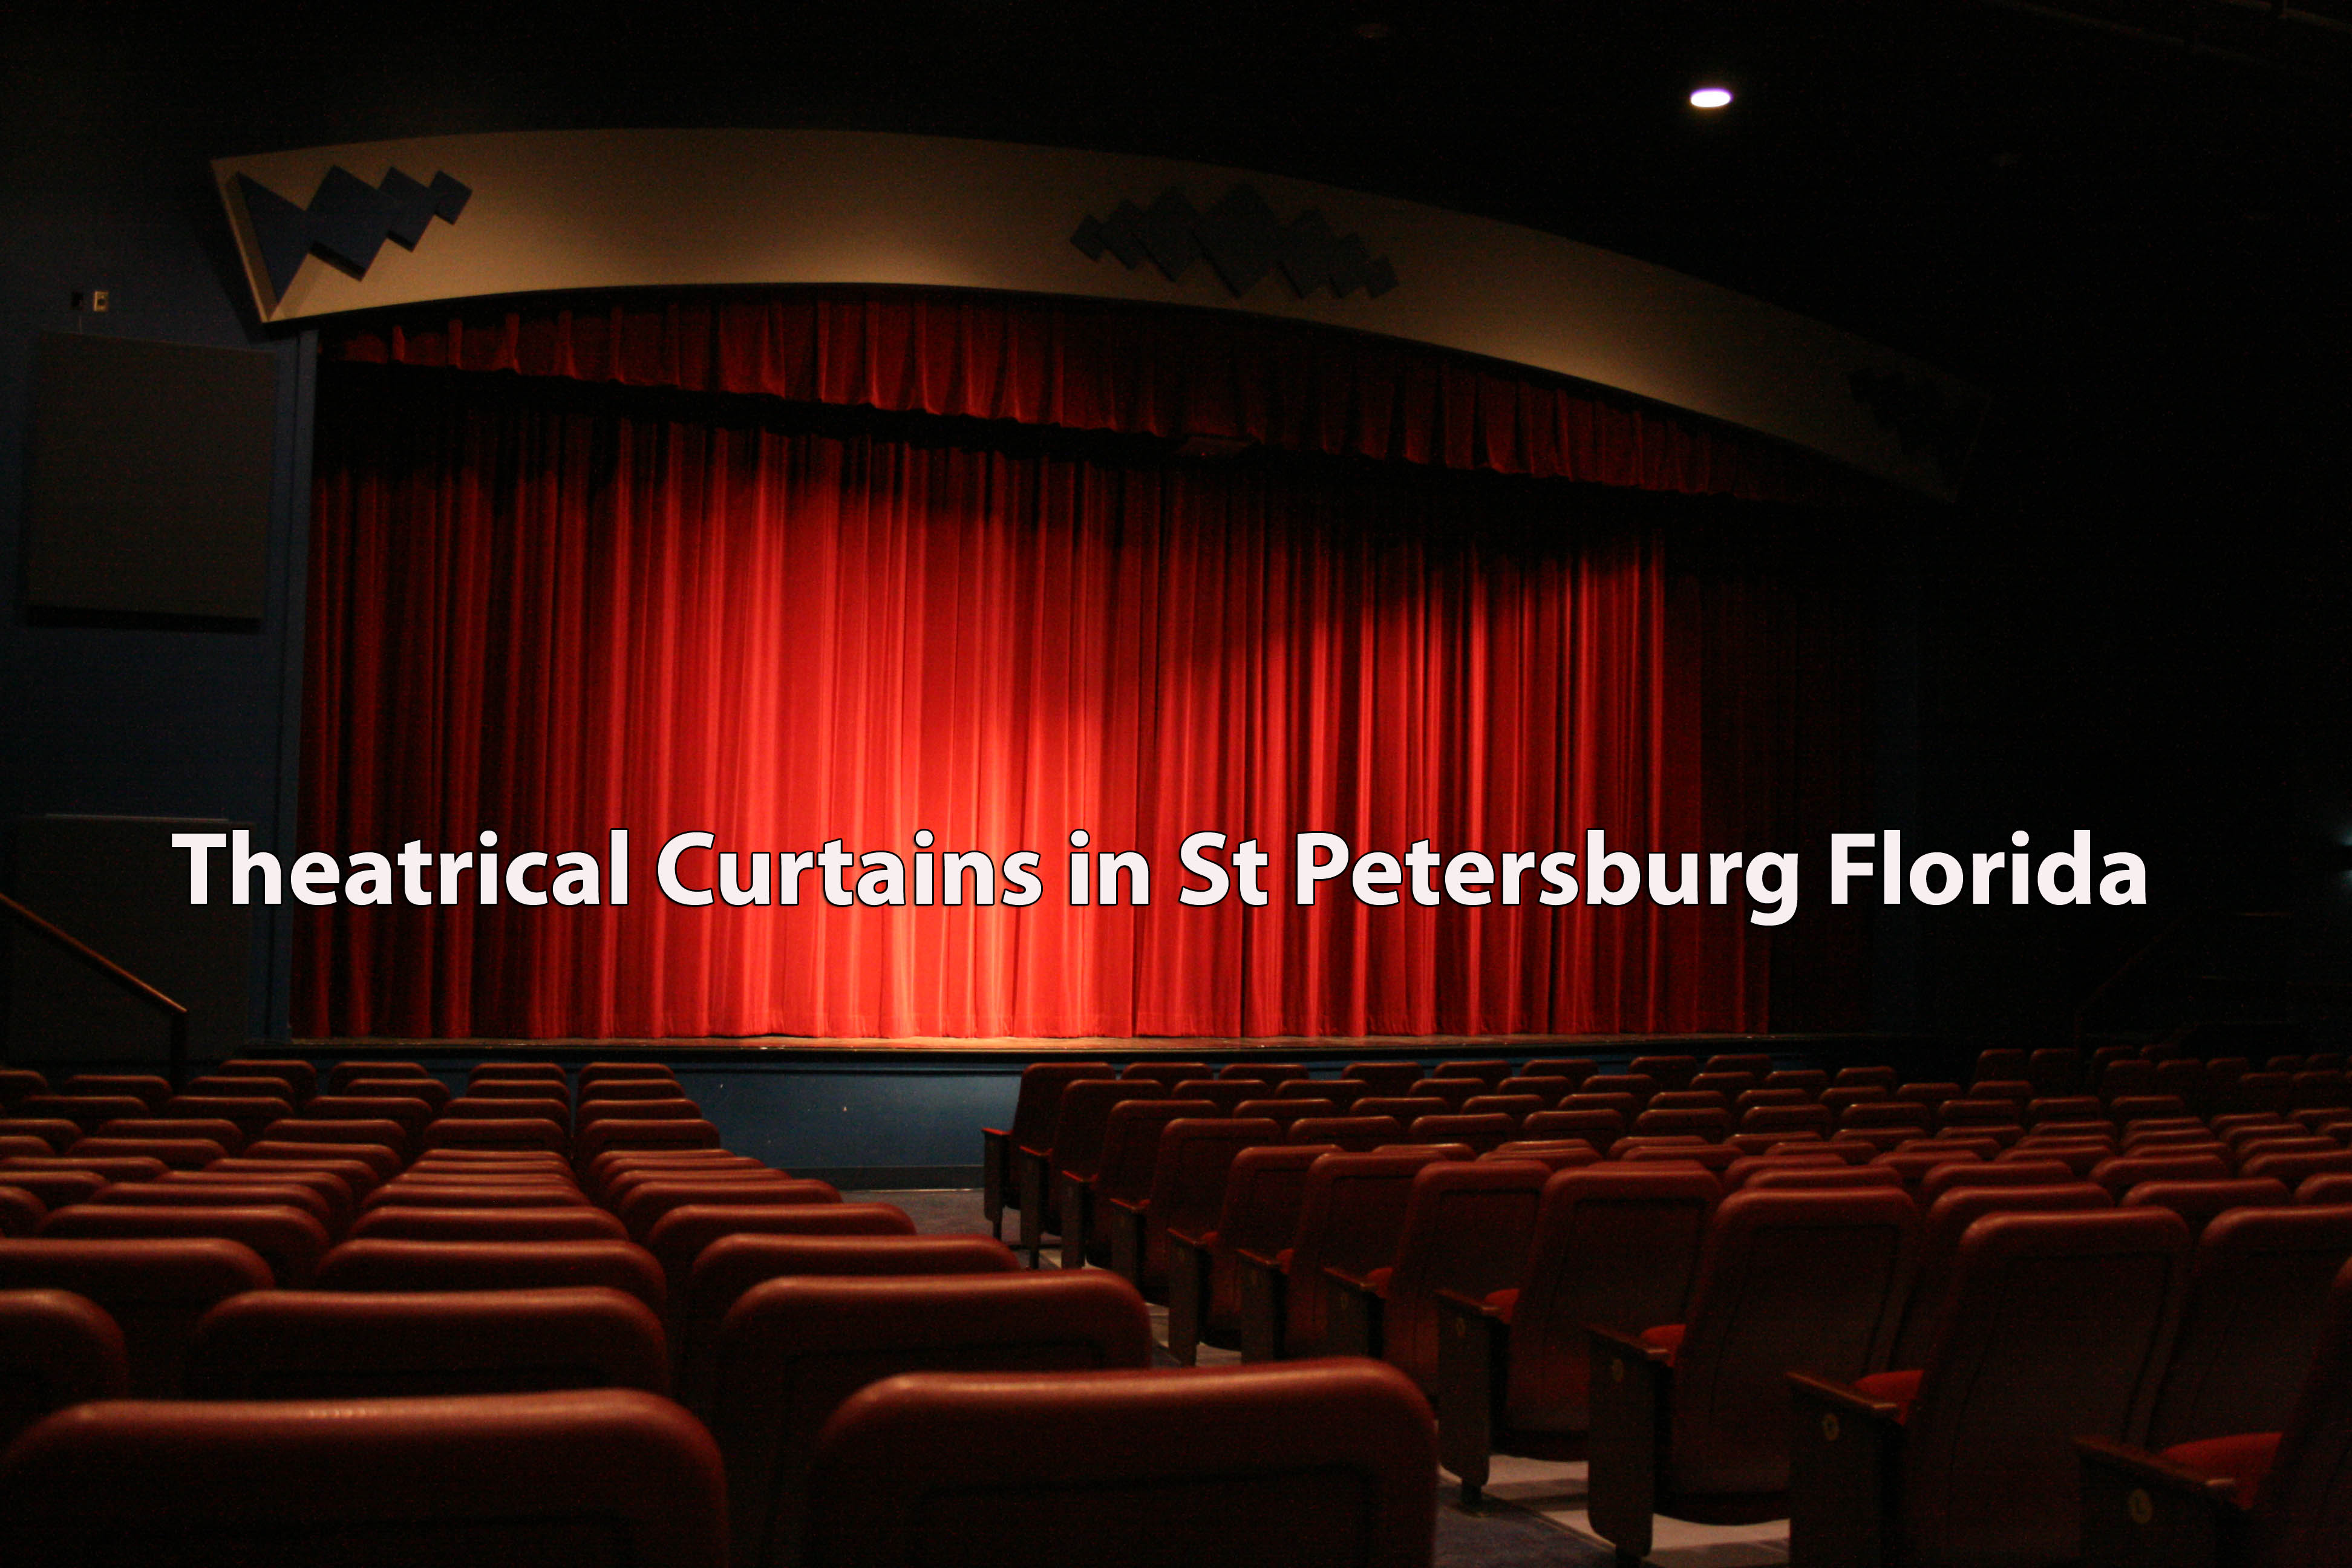 Theatrical Curtains in St Petersburg Florida